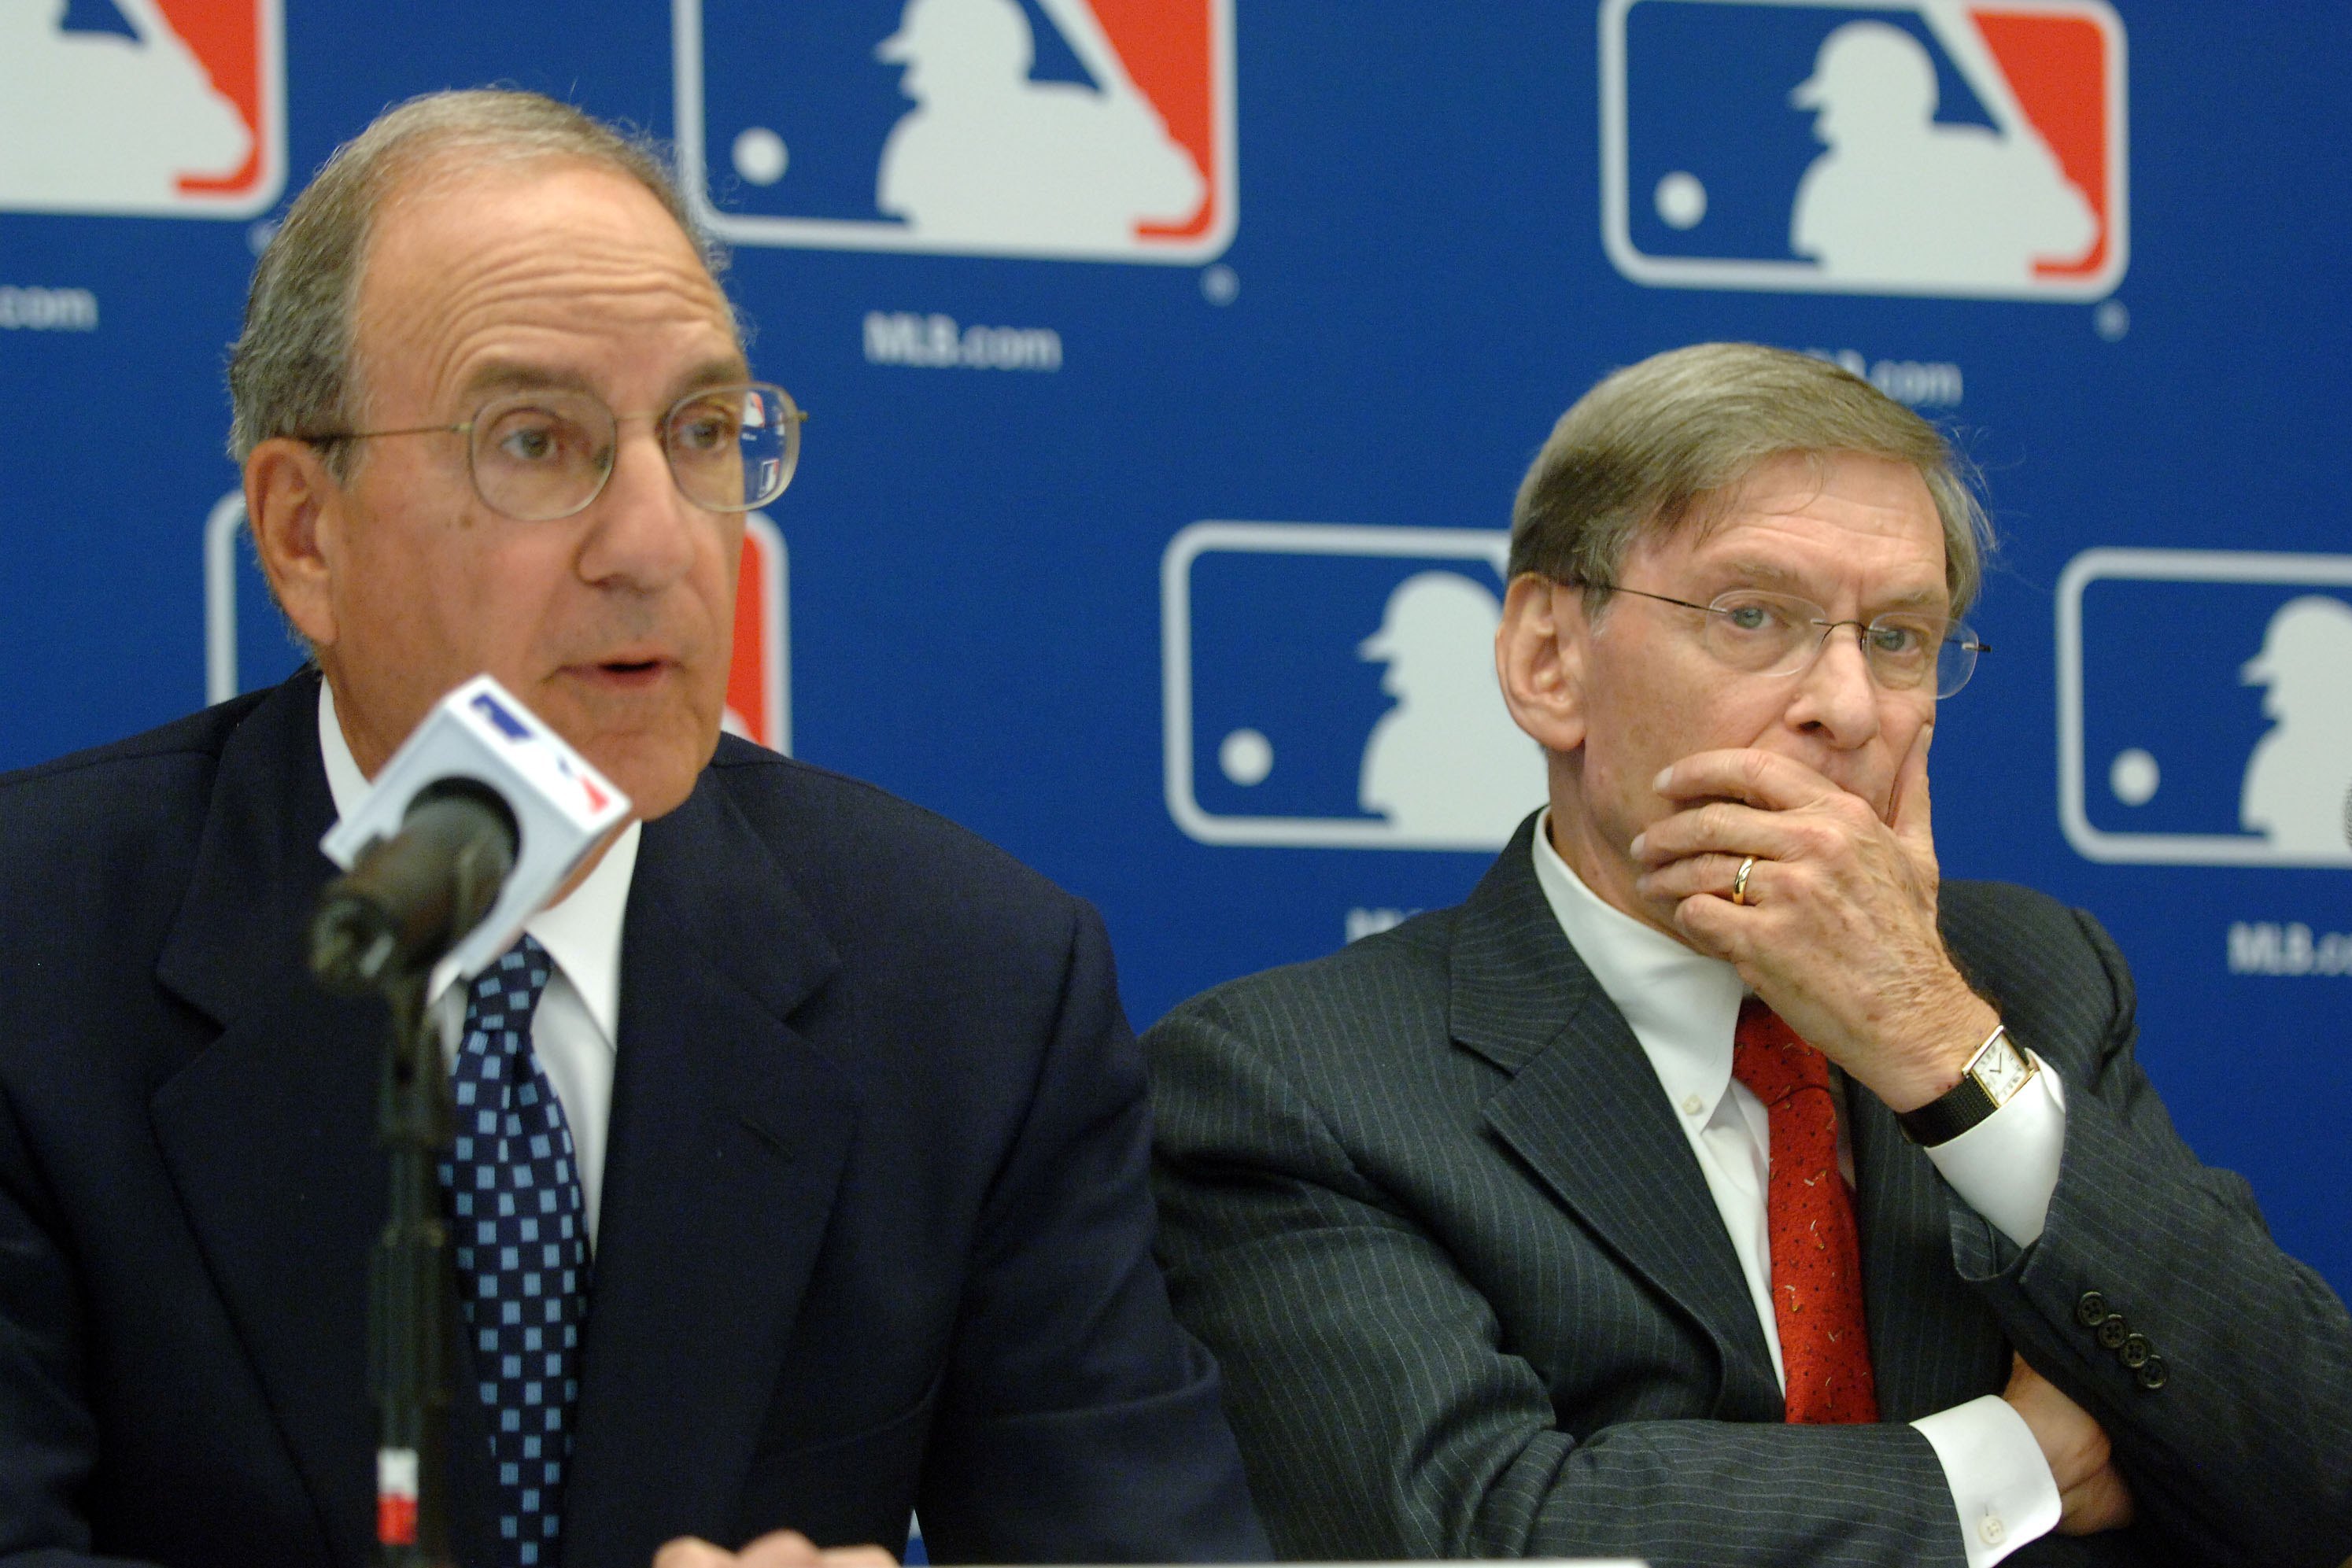 Baseball players linked to PEDs 'disgraced the integrity of the